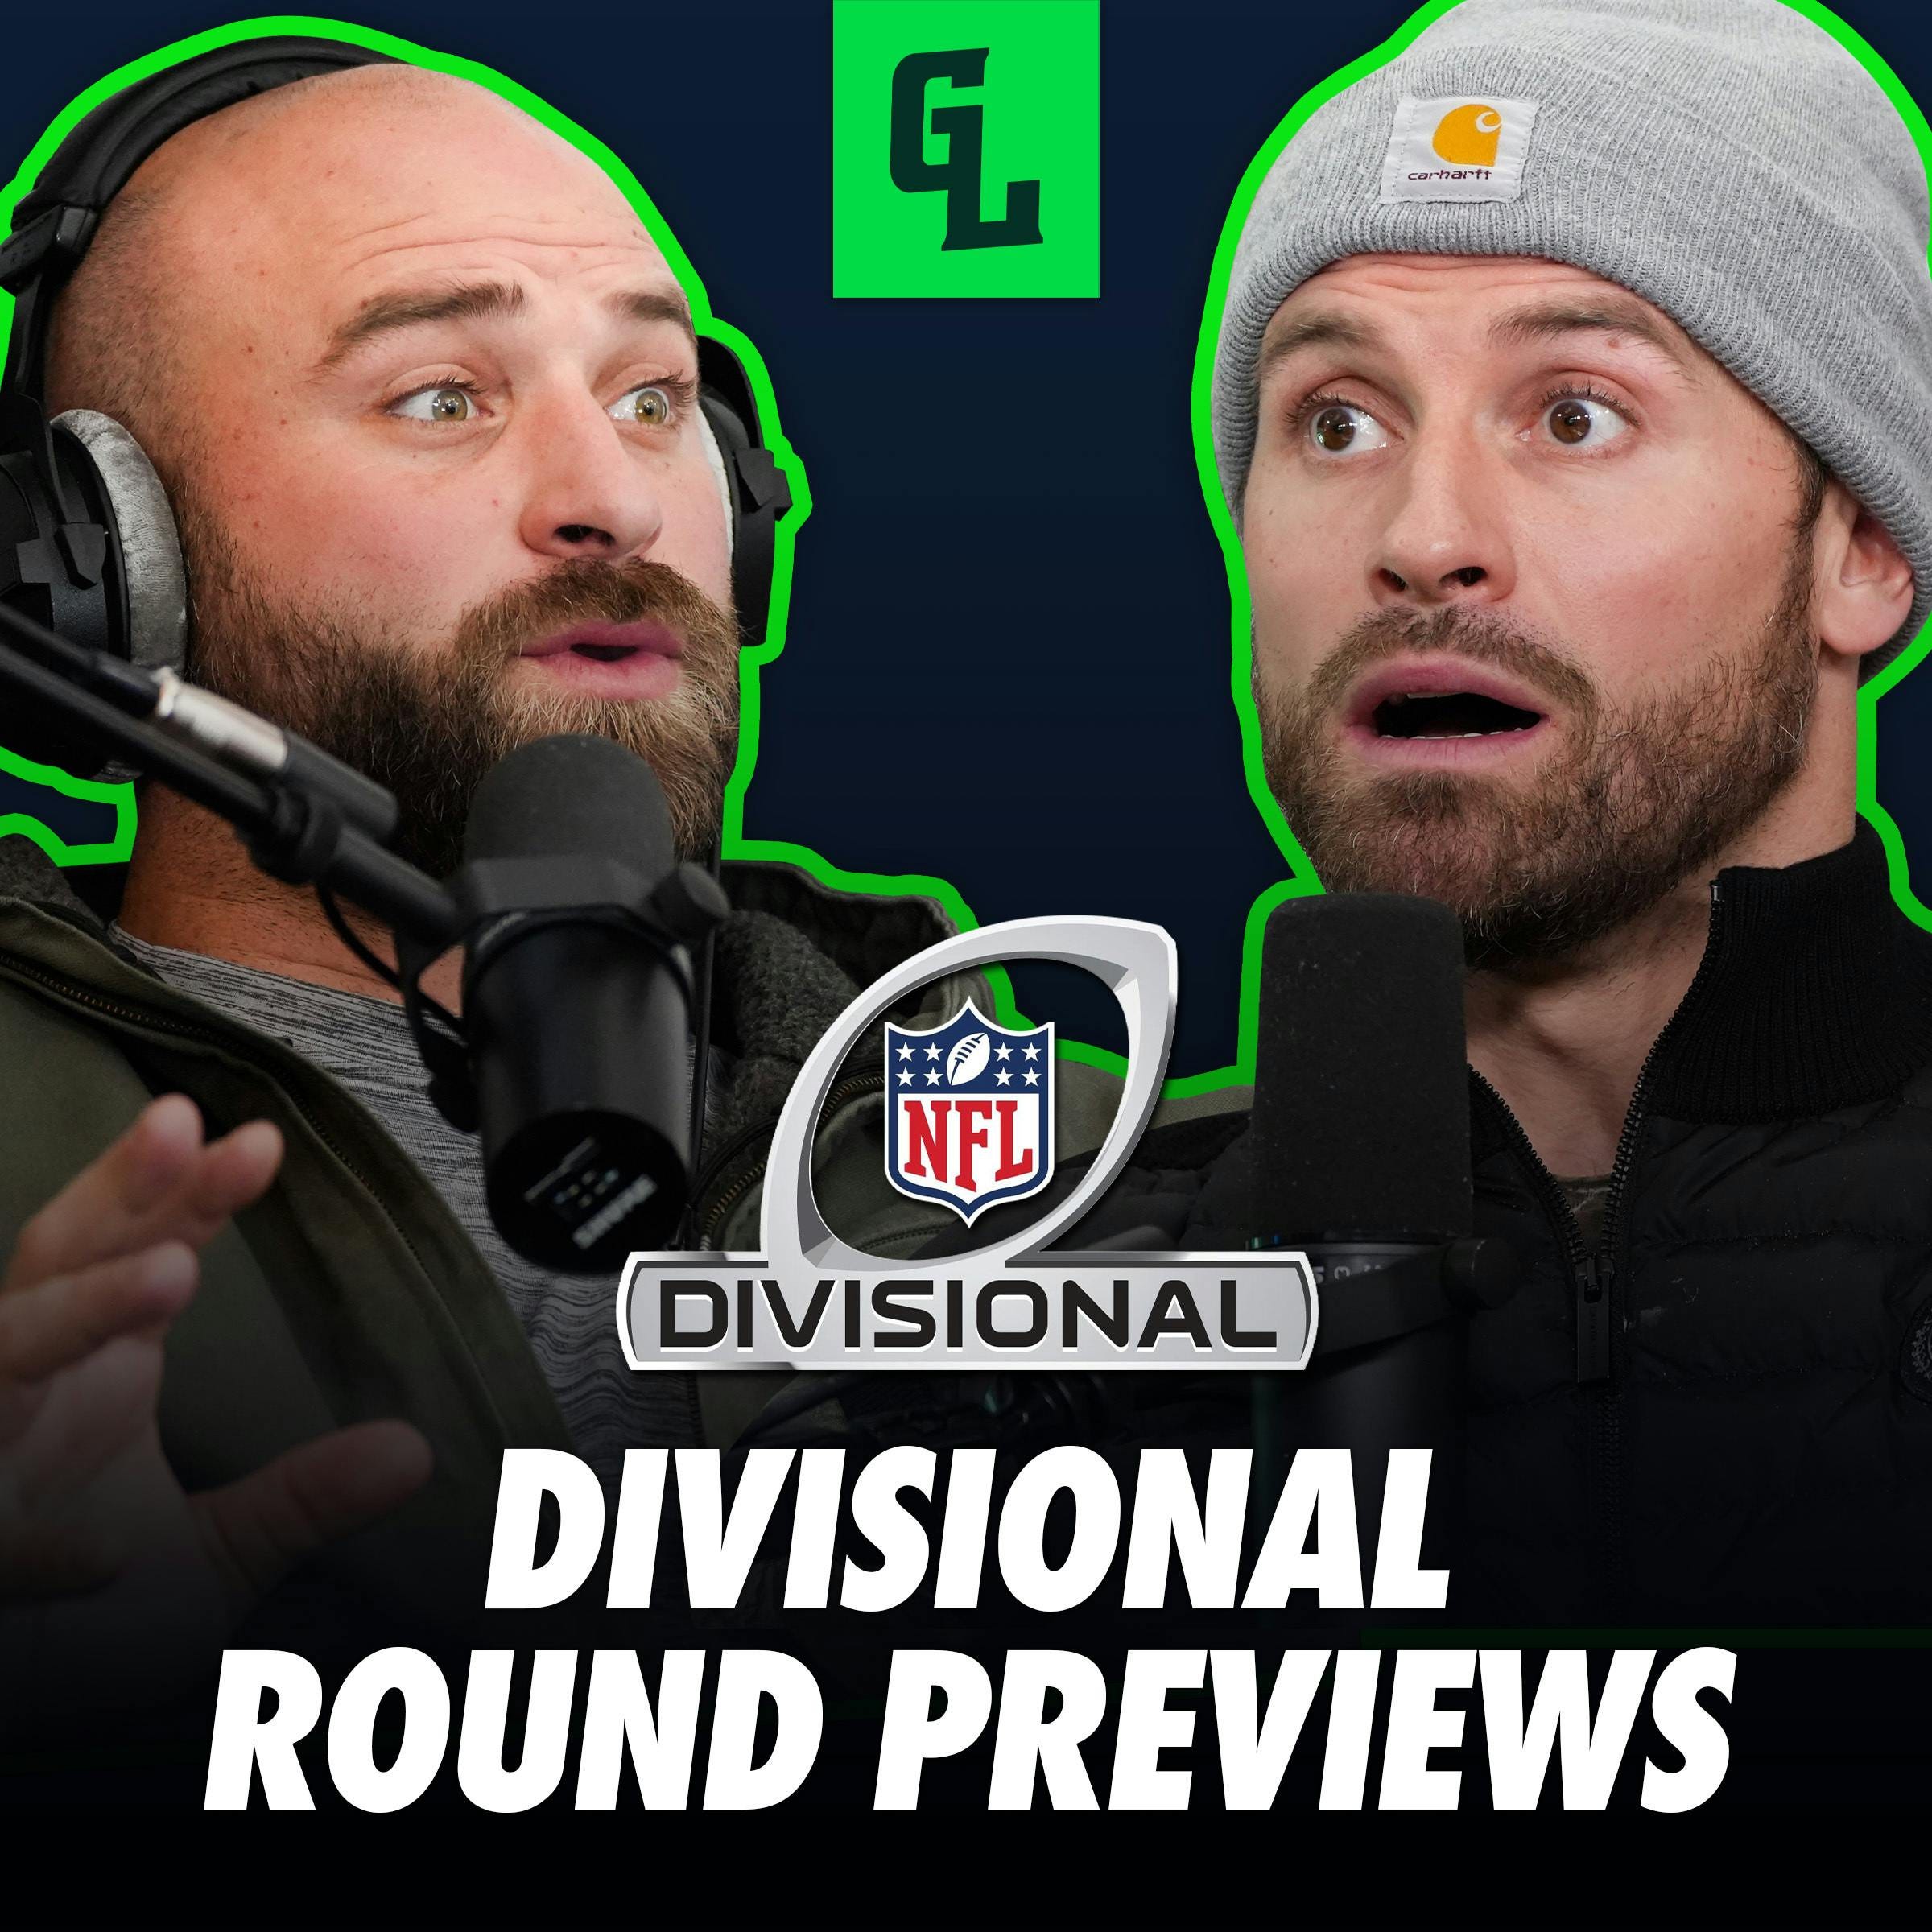 Stanford Steve! NFL Divisional Round Preview, Future of Nick Sirianni, Jerod Mayo Hired in NE & Best Bets